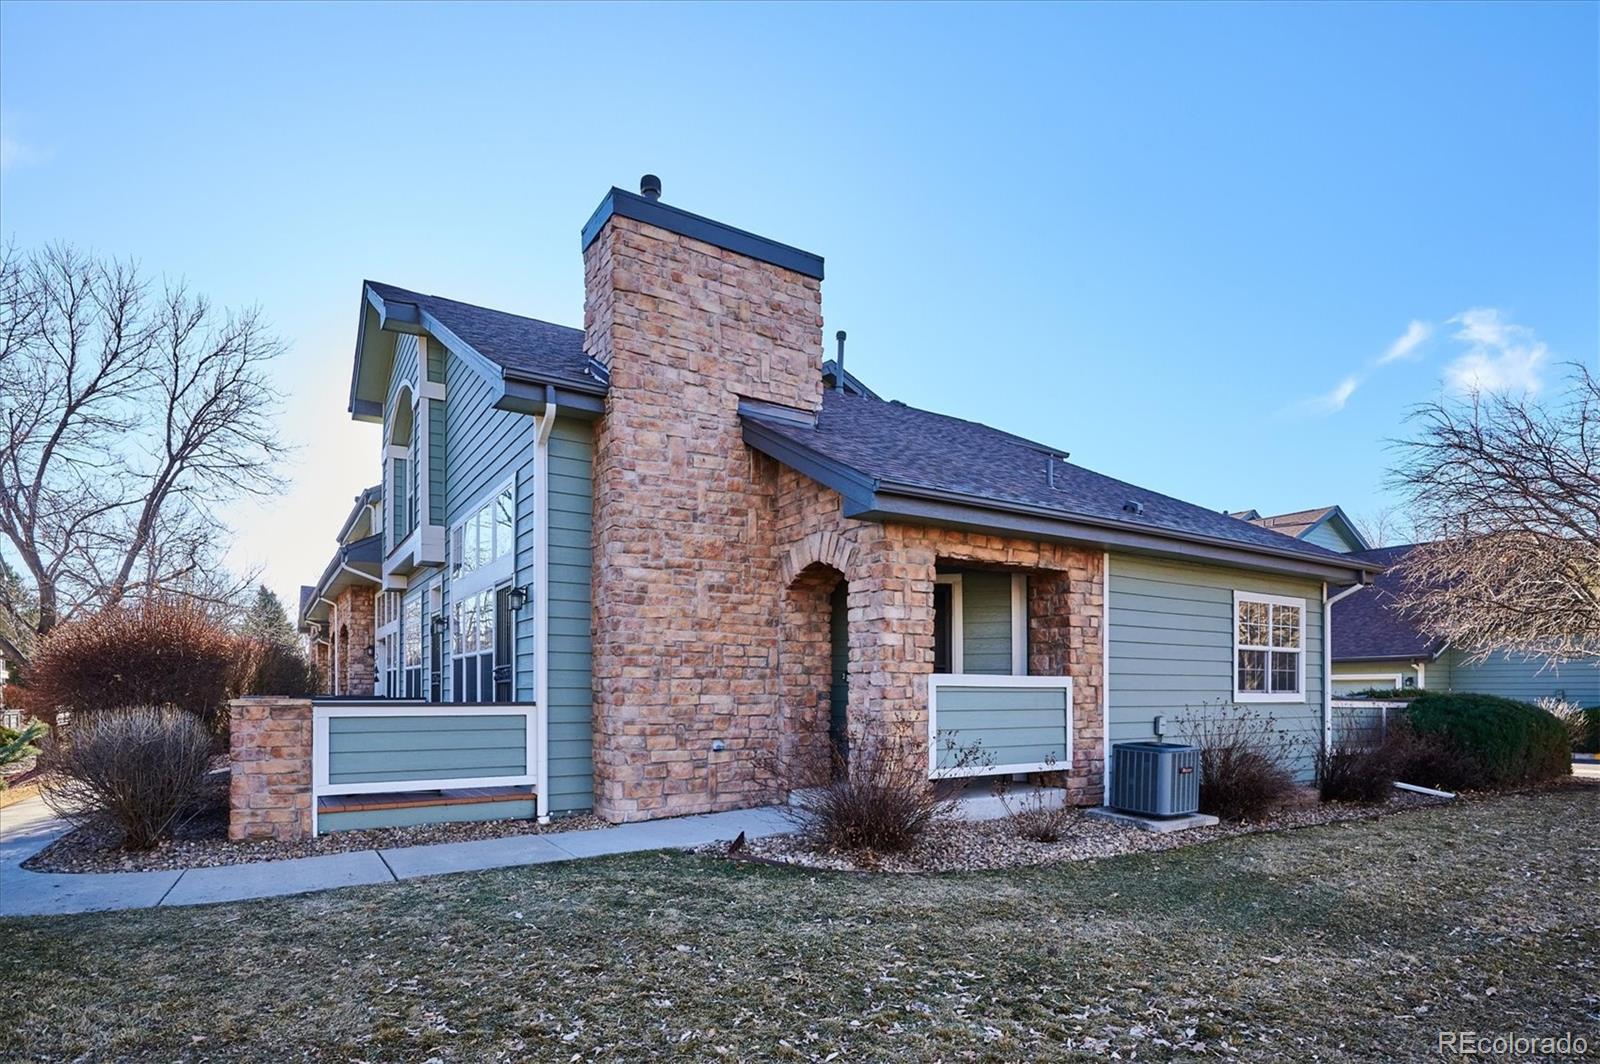 Report Image for 2797 W Greens Drive,Littleton, Colorado